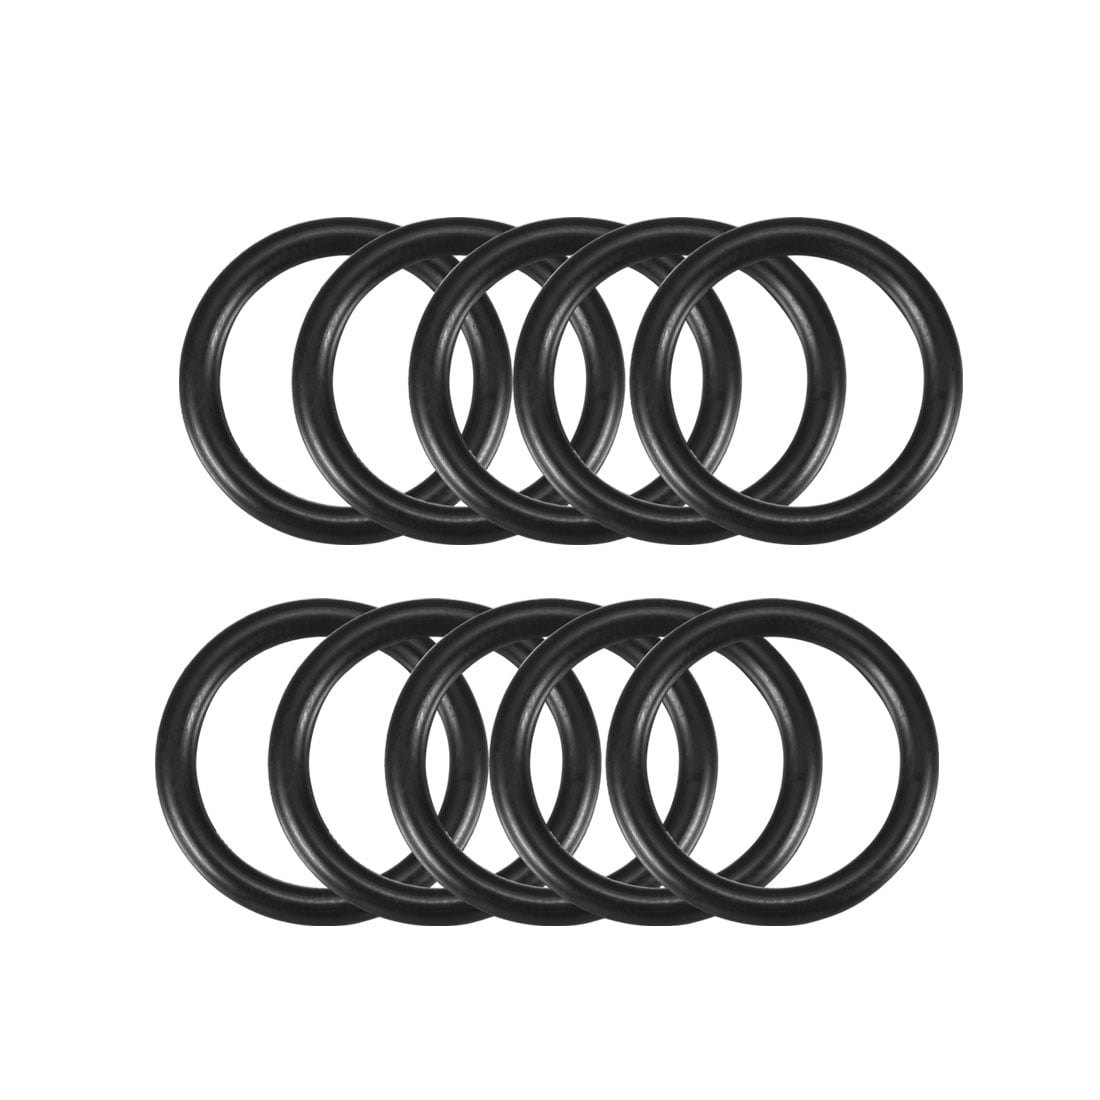 10 x Mechanical Rubber O Ring Oil Seal Gaskets Black 20 x 2.5mm 